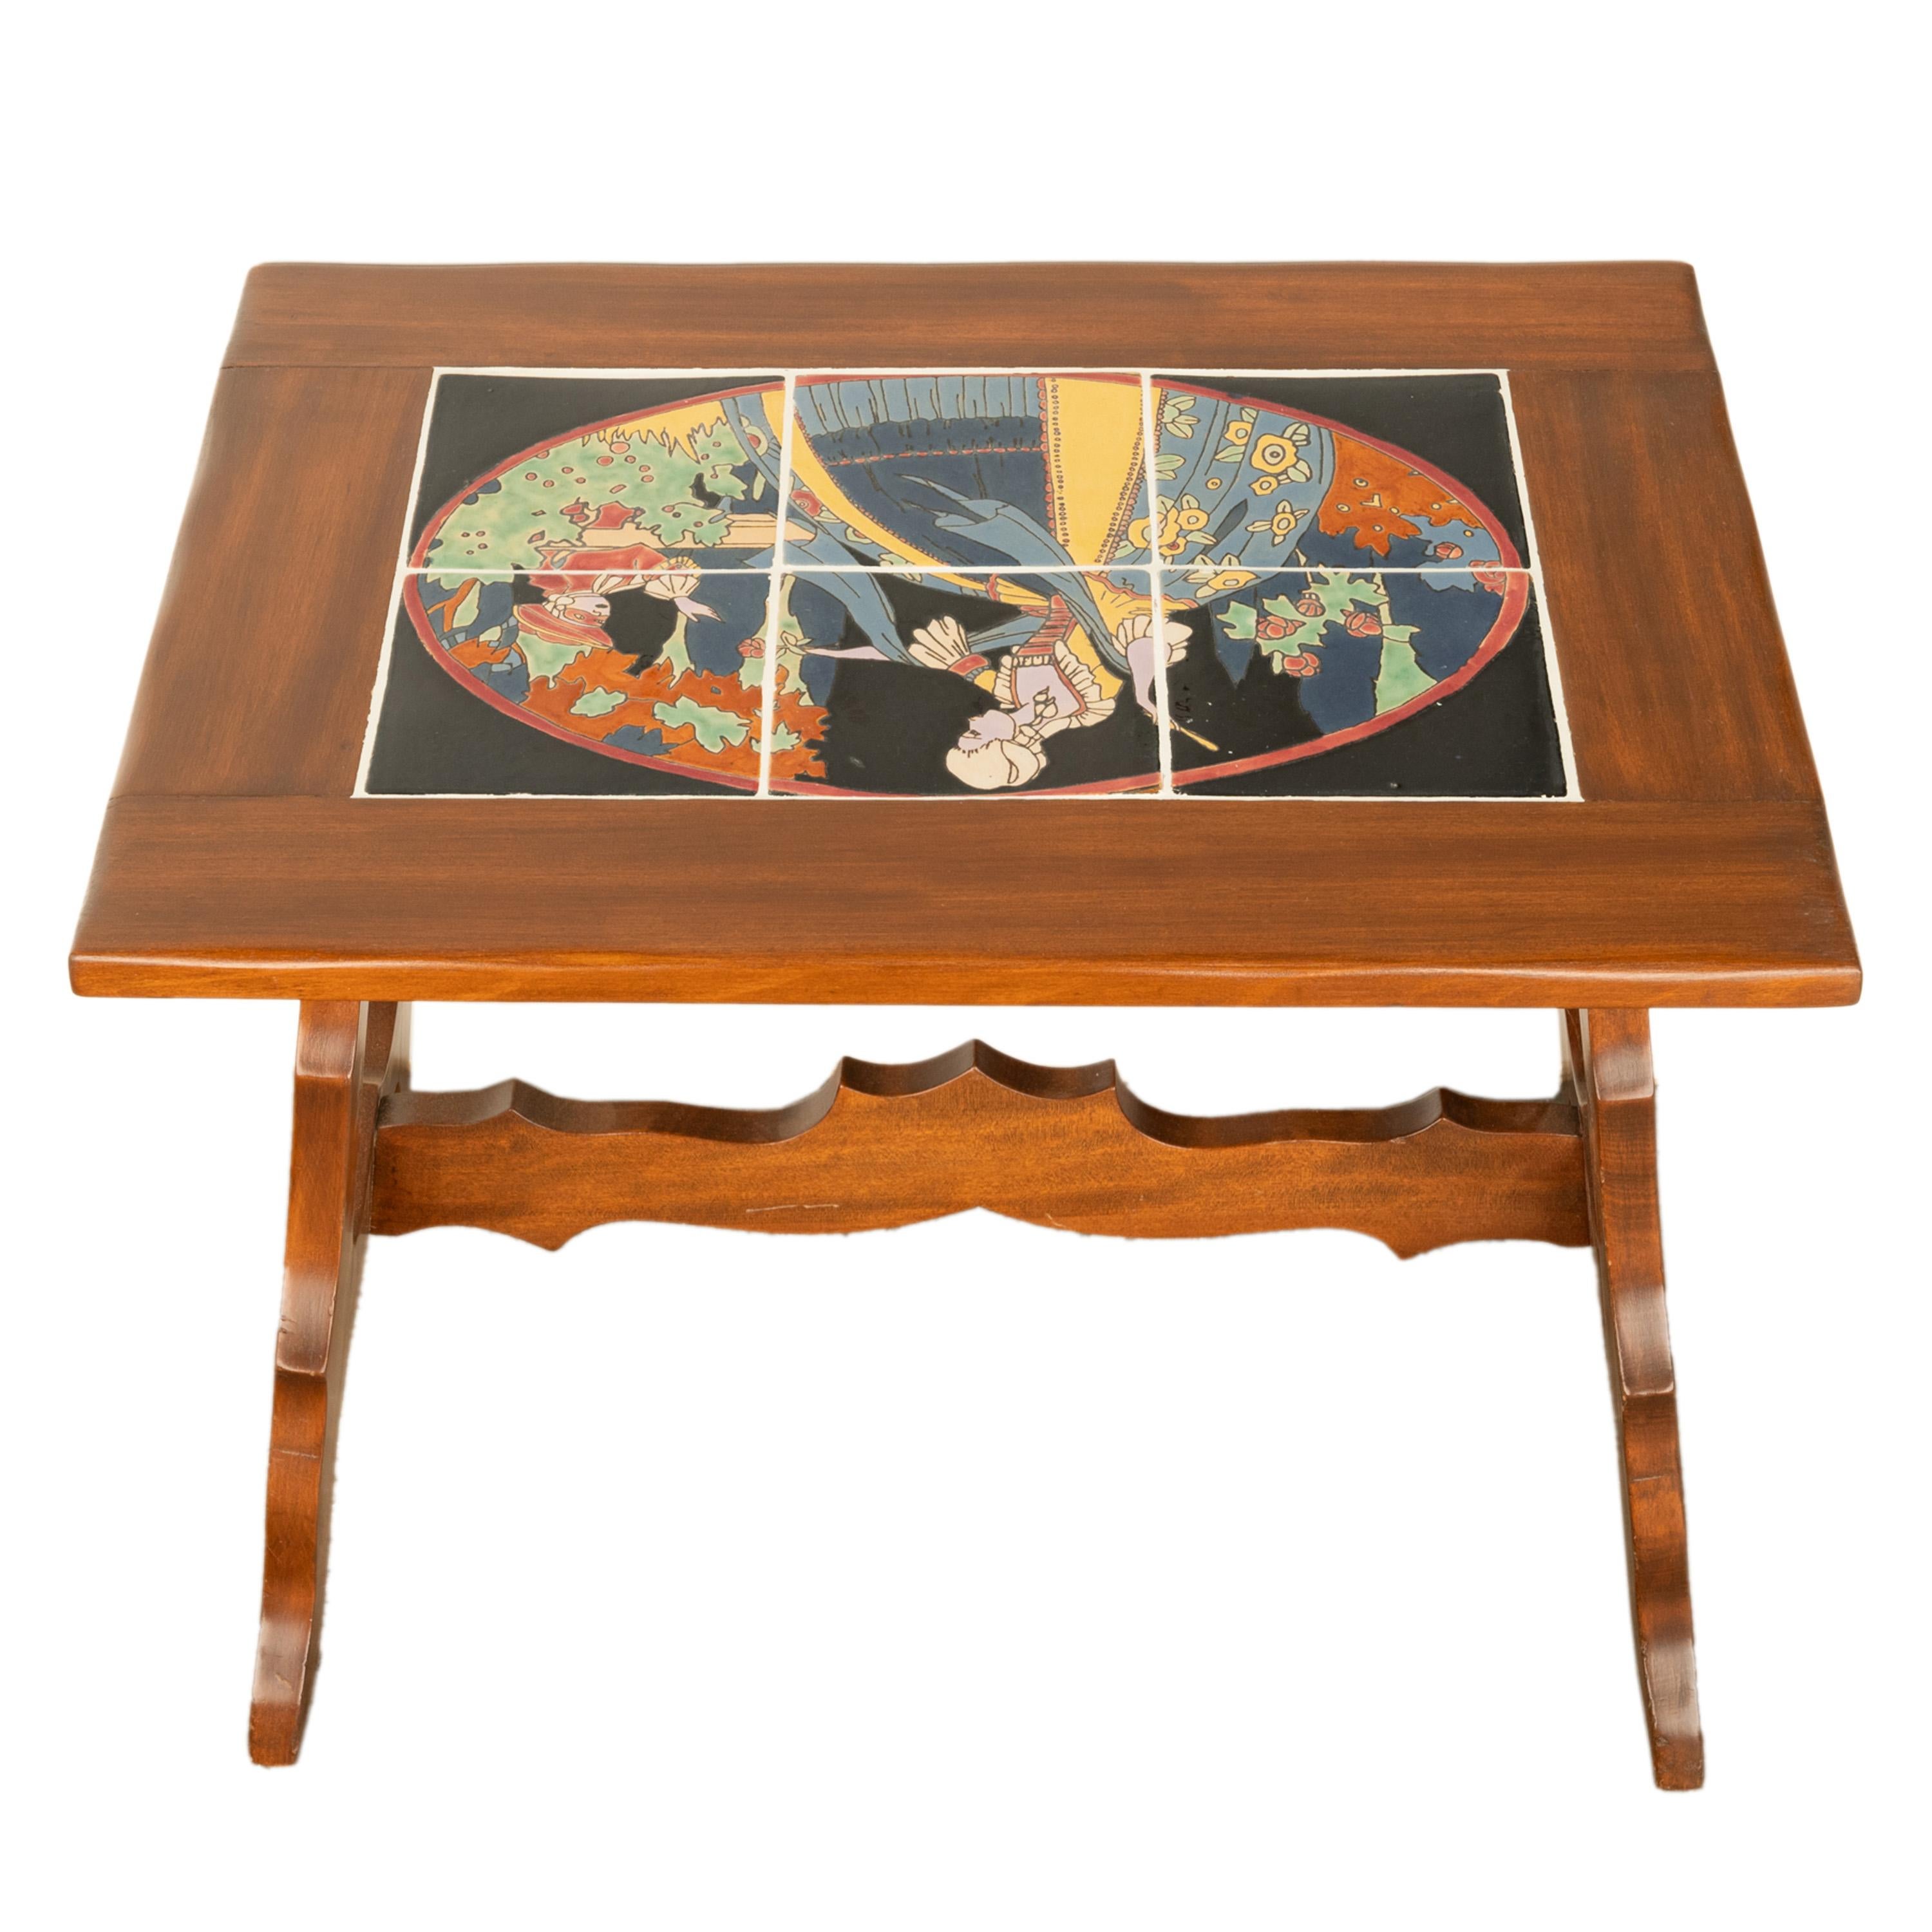 Antique Mission Catalina Monterrey California Tile Top Walnut Coffee Table 1930 For Sale 8